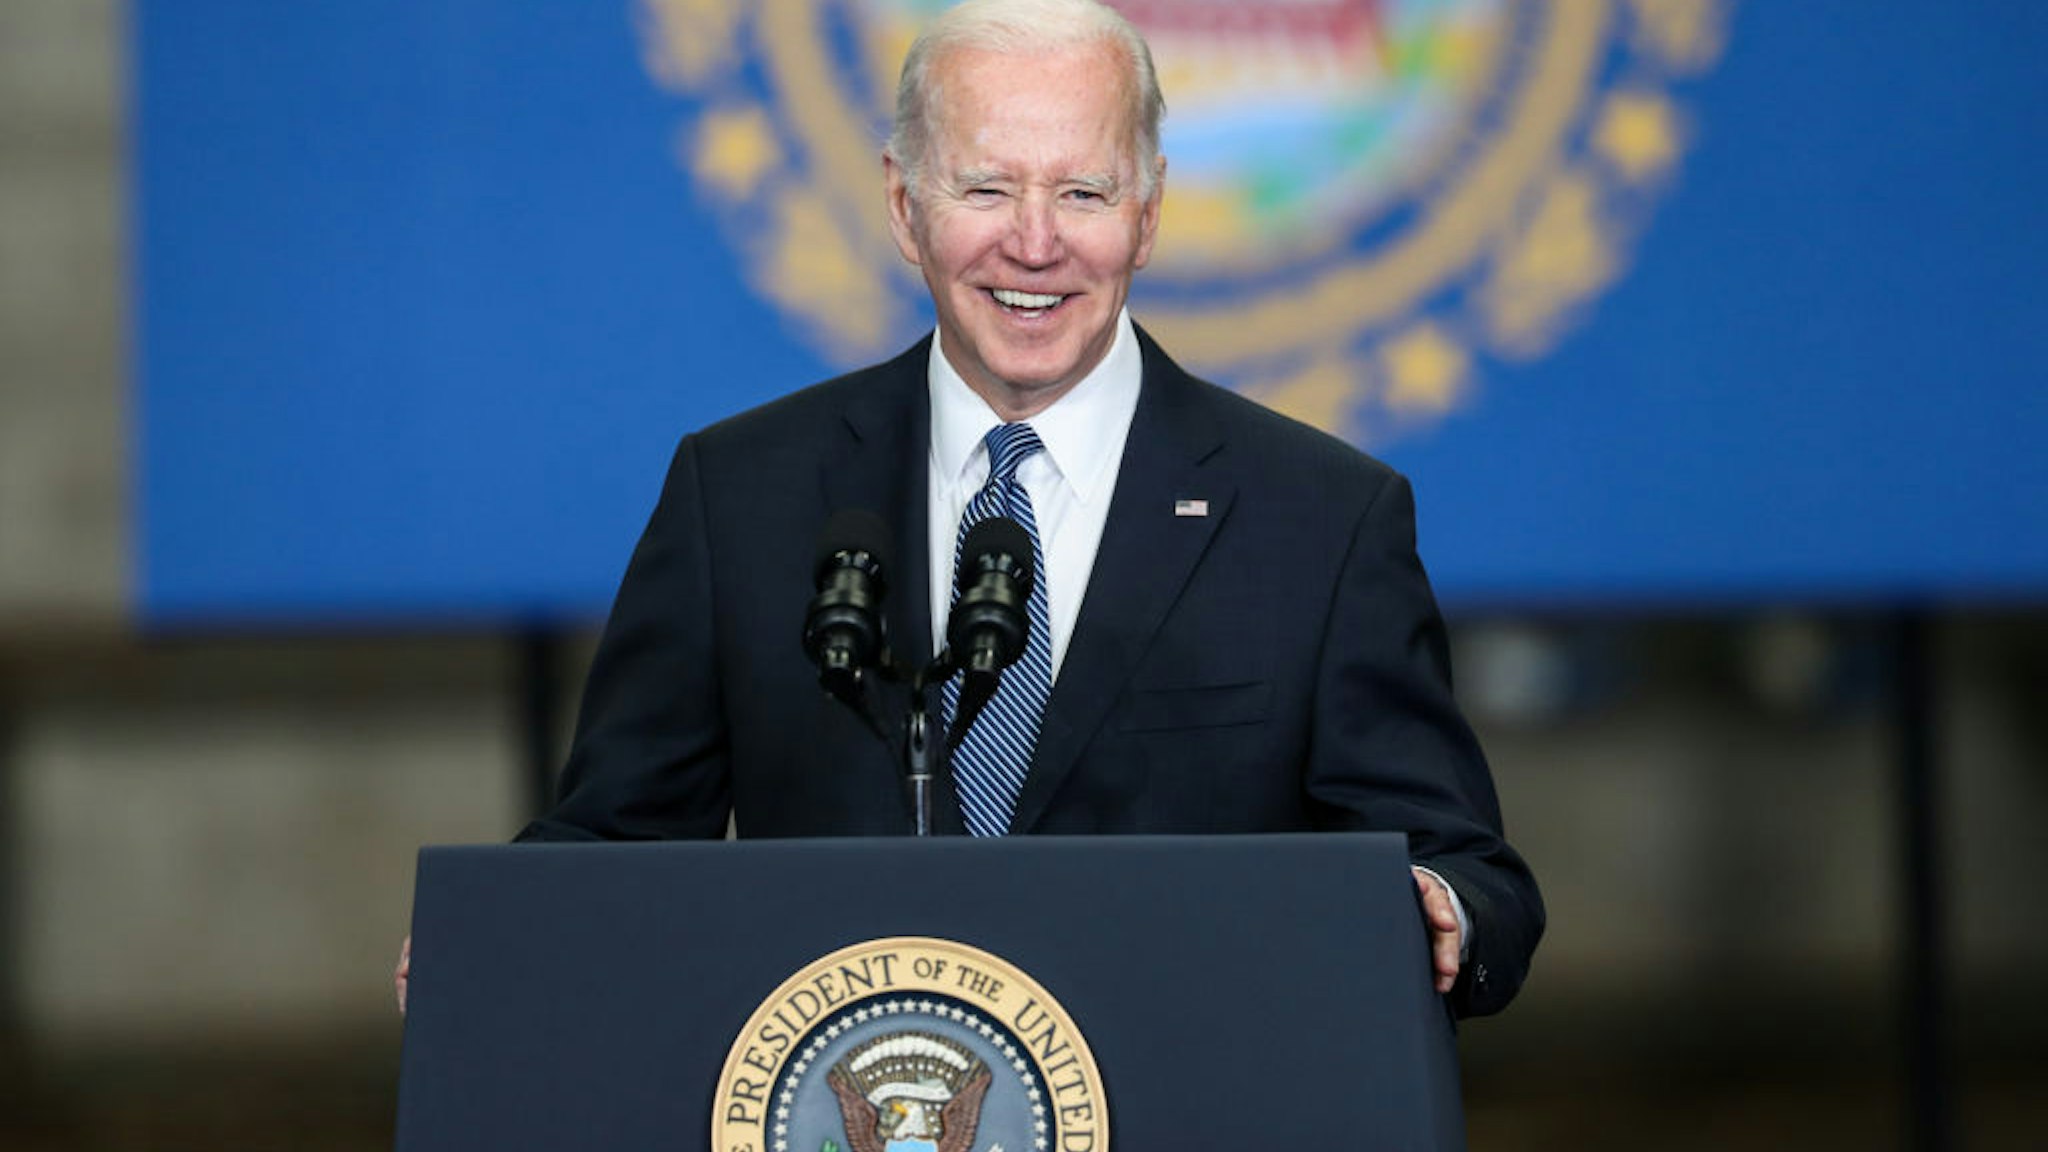 PORTSMOUTH, NH - APRIL 19: U.S. President Joe Biden delivers remarks on the bipartisan infrastructure law on April 19, 2022 in Portsmouth, New Hampshire. (Photo by Scott Eisen/Getty Images)